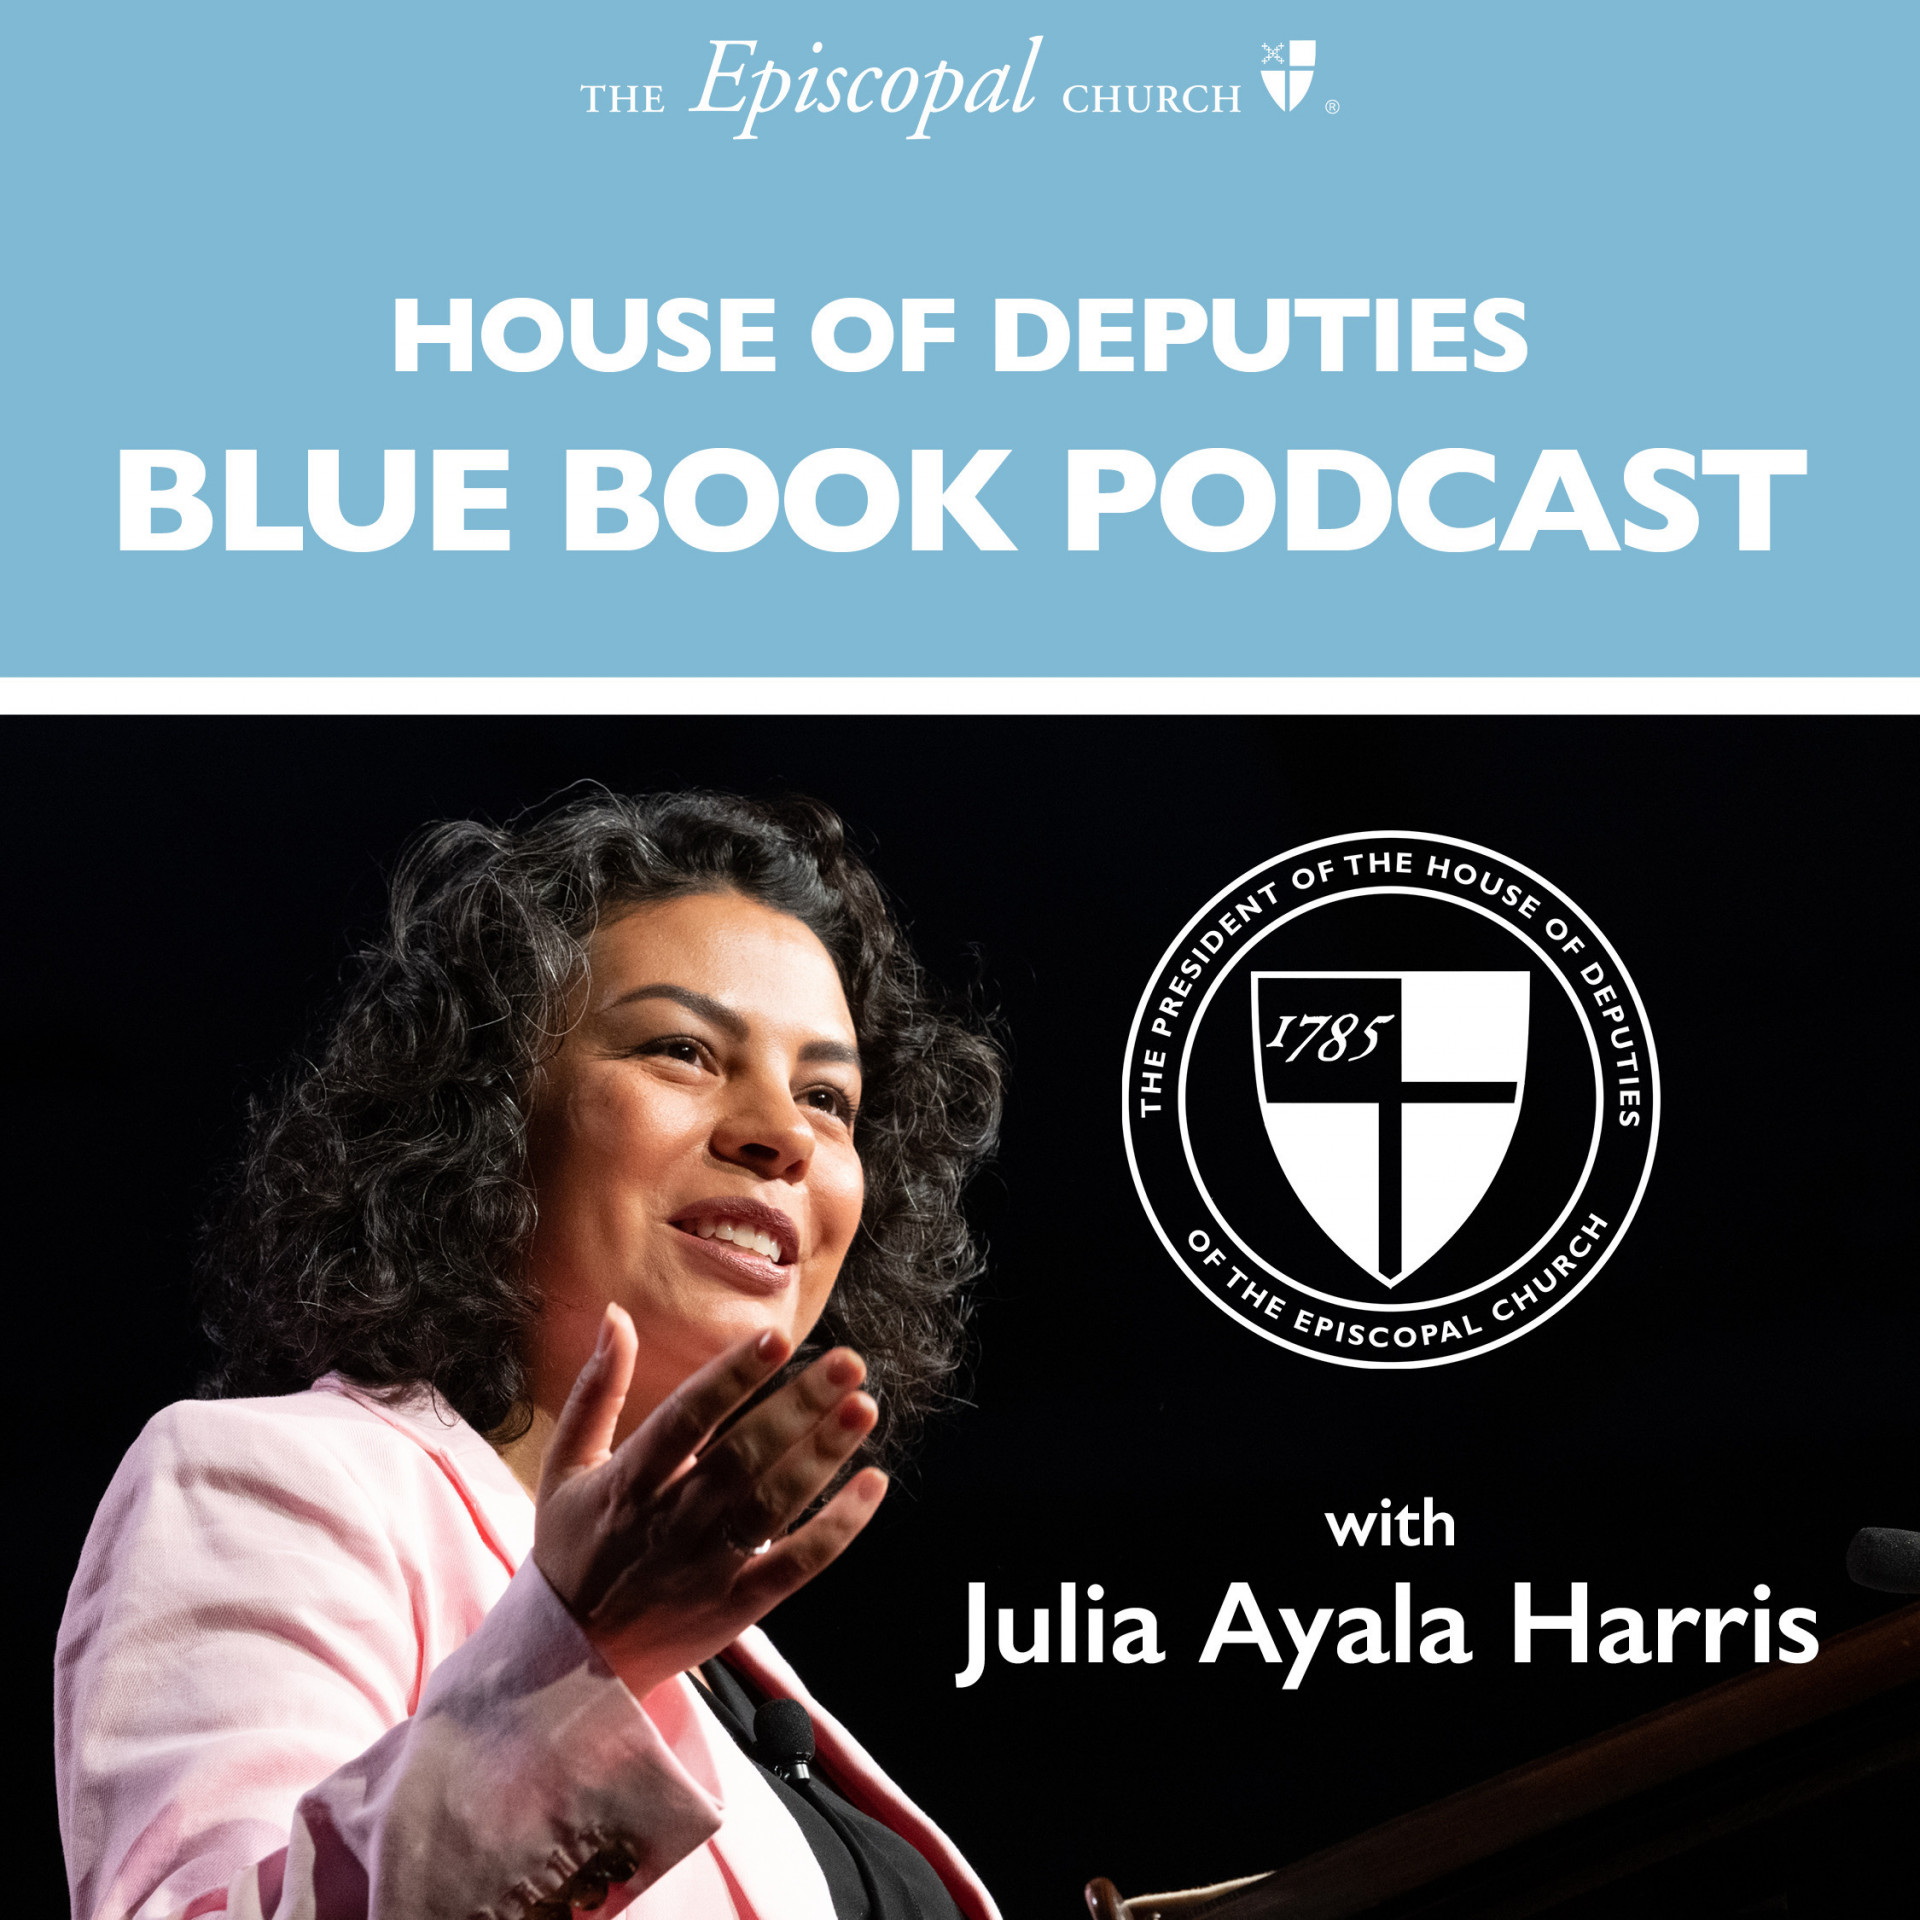 Catch up with the House of Deputies Blue Book Podcast!